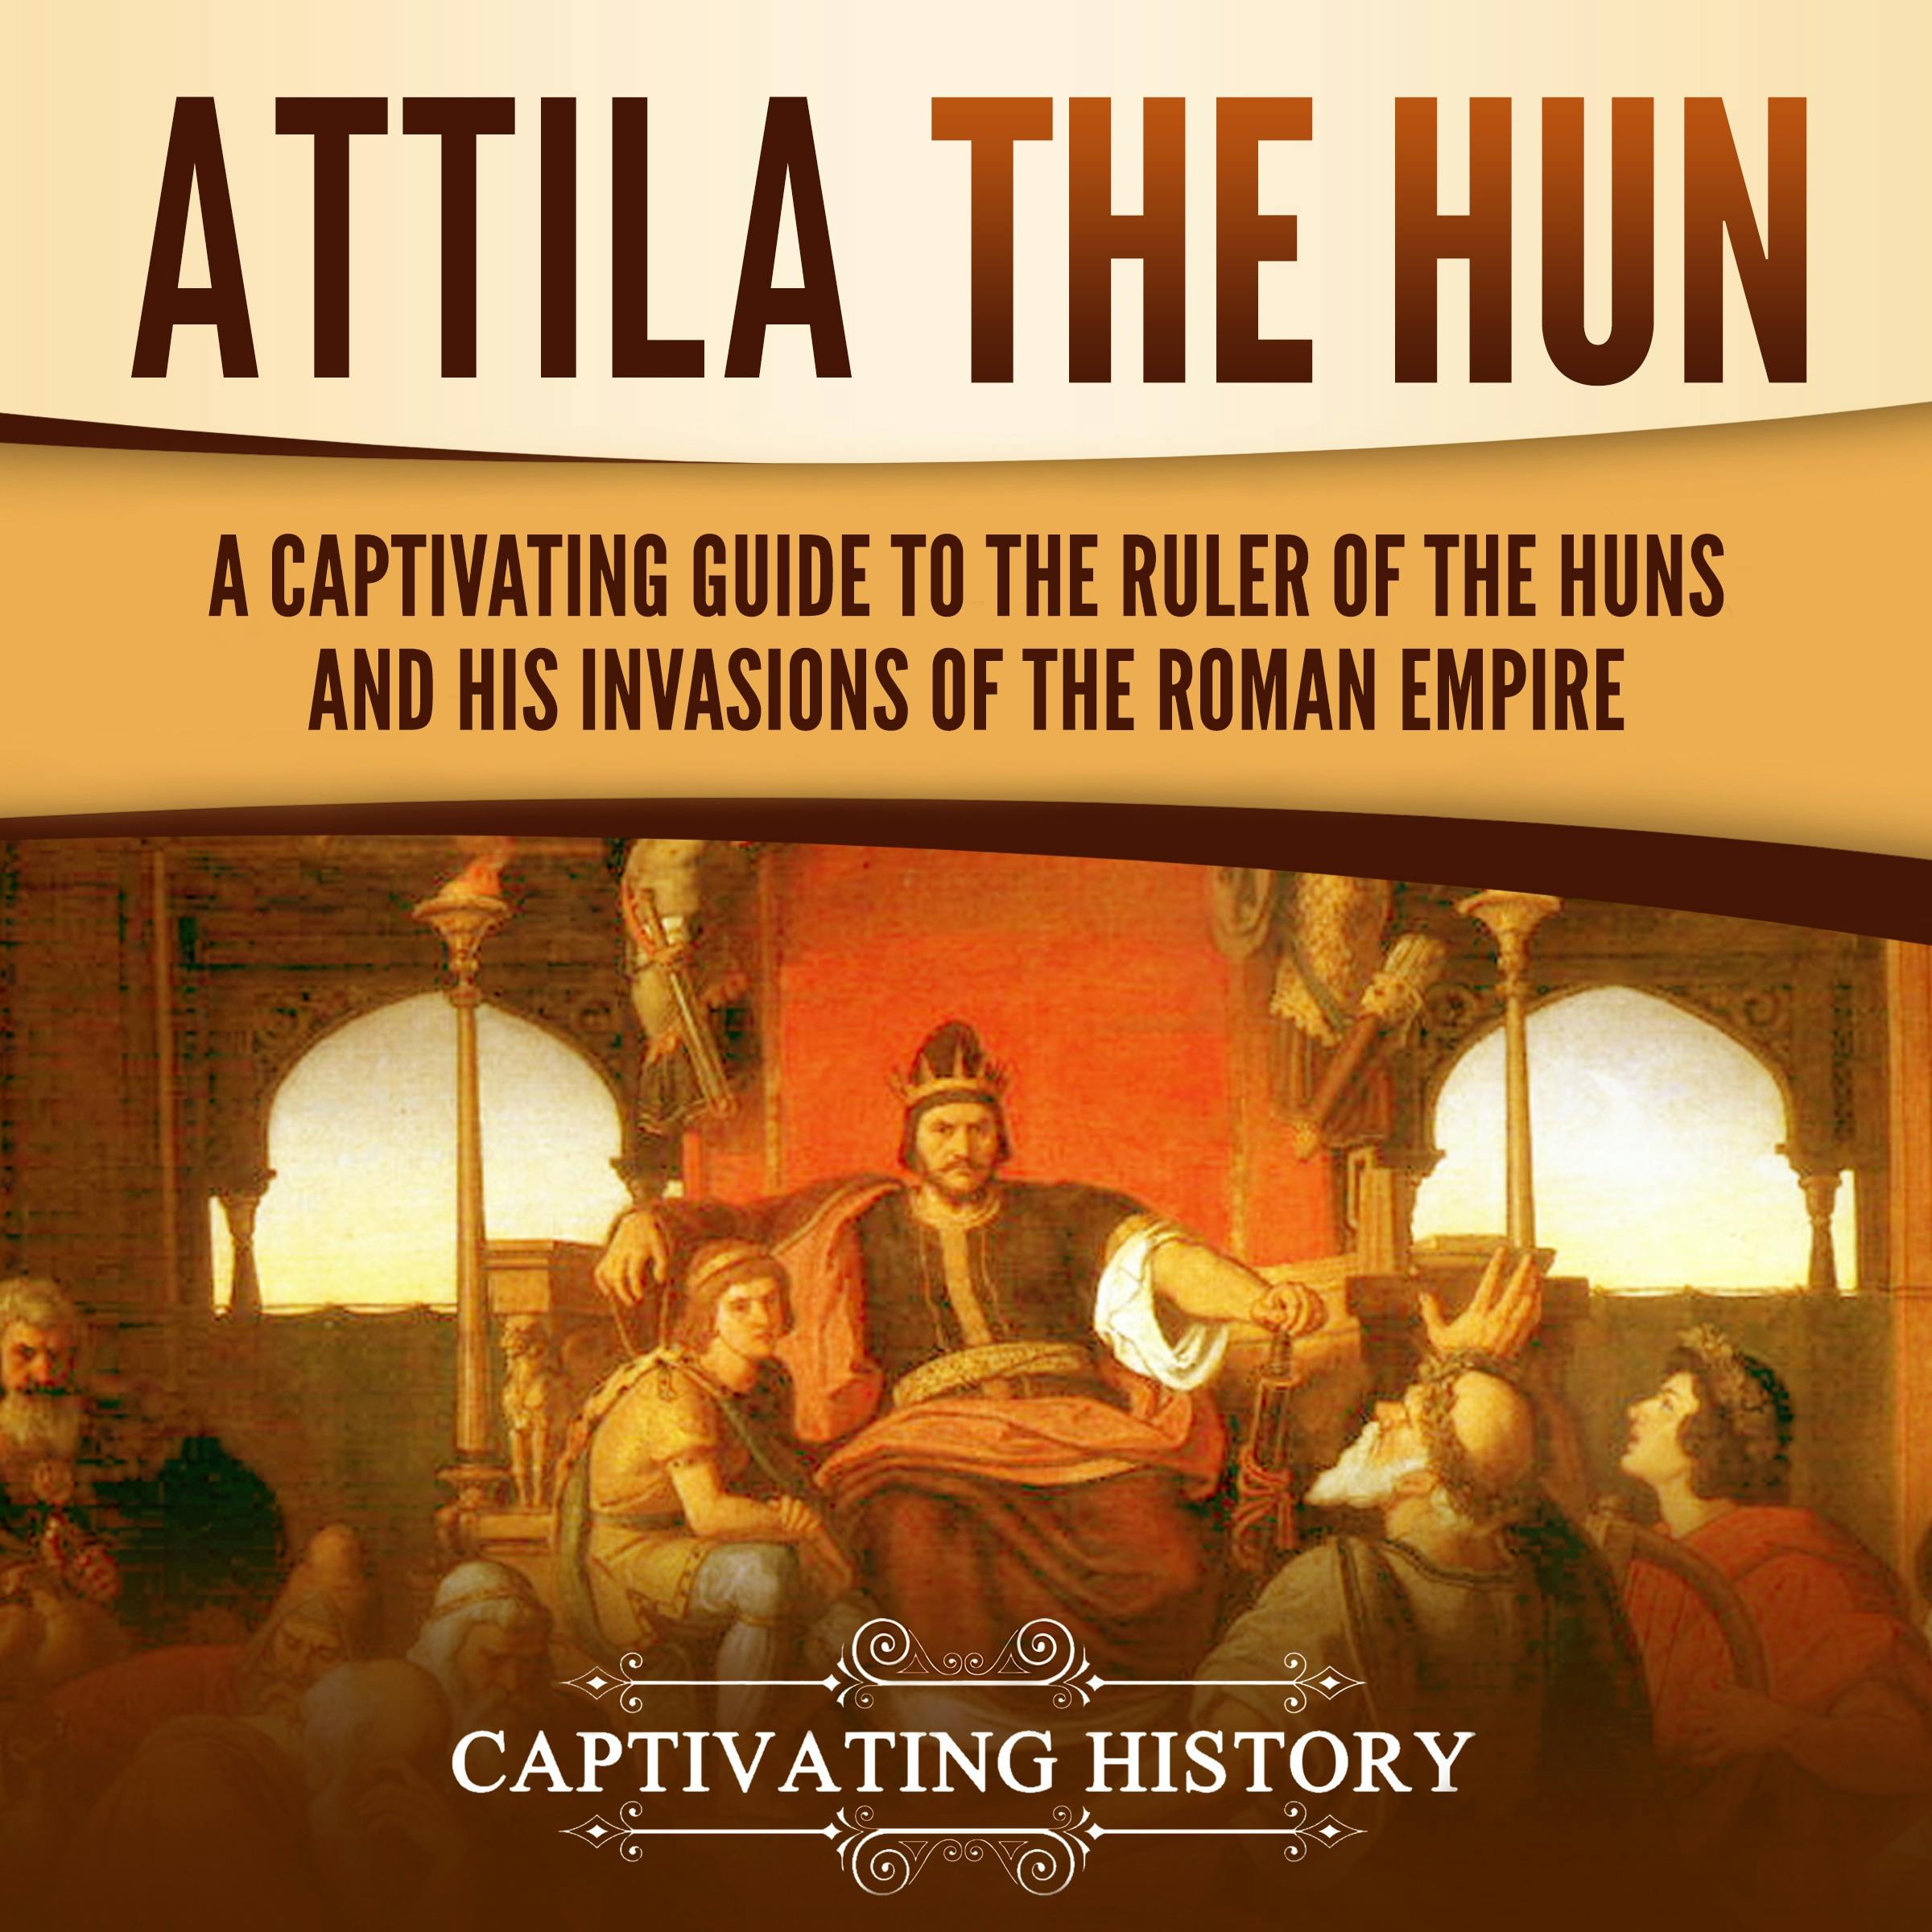 Attila the Hun: A Captivating Guide to the Ruler of the Huns and His Invasions of the Roman Empire - undefined